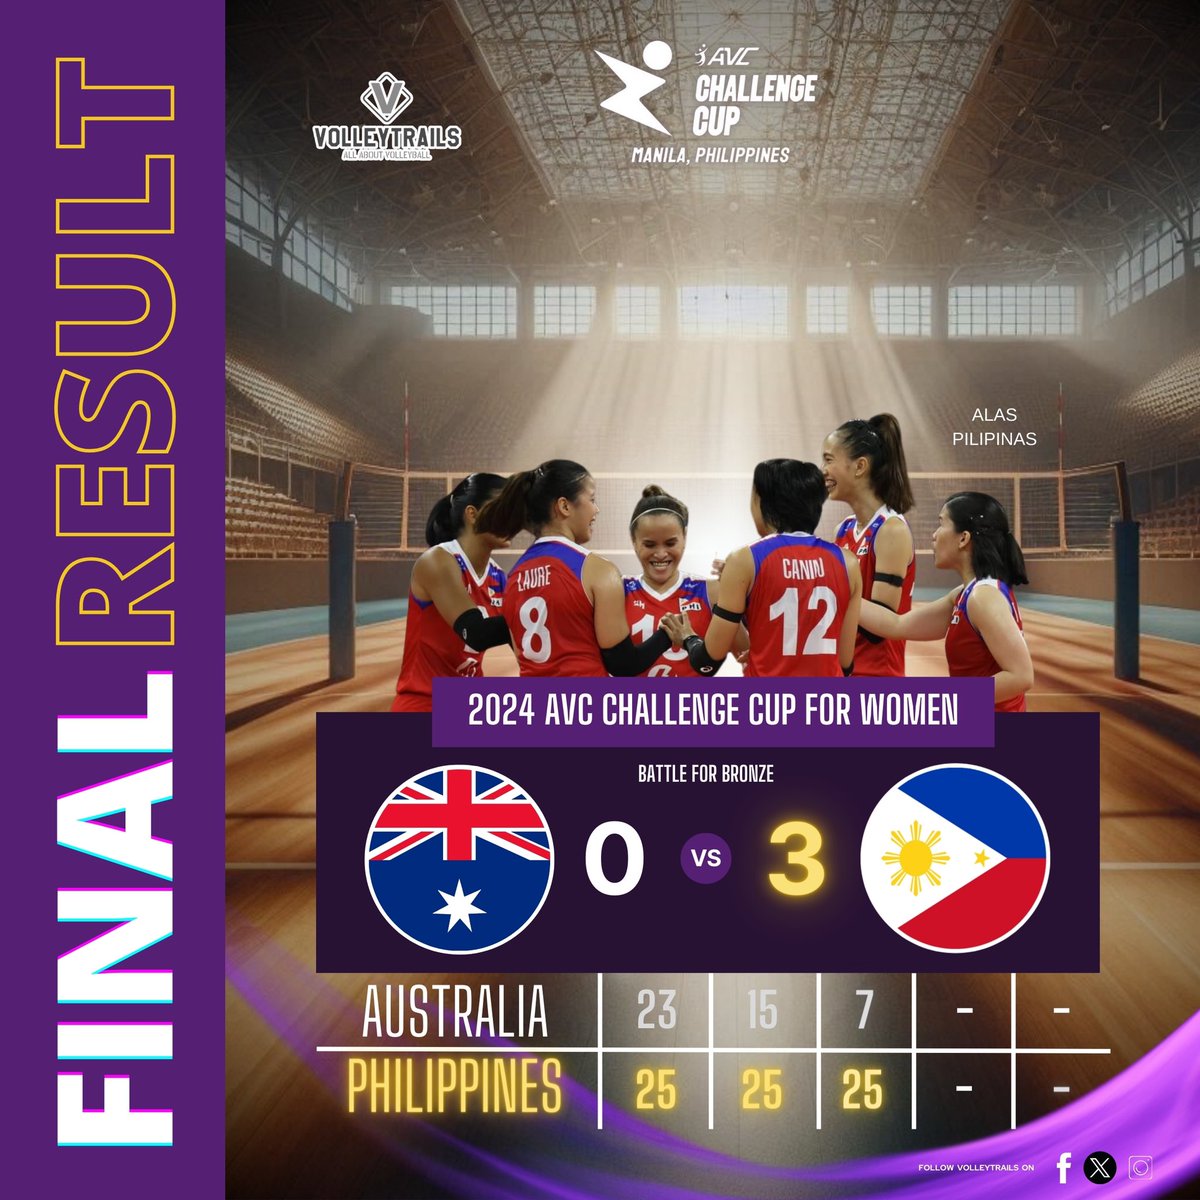 JUST IN: The 🇵🇭 Philippines has clinched the 🥉 bronze medal after defeating 🇦🇺 Australia in straight sets: 25-23, 25-15, 25-7. This is the first time the Philippines has ever had a podium finish in any AVC-sanctioned tournament. Congratulations, Alas Pilipinas! 👏